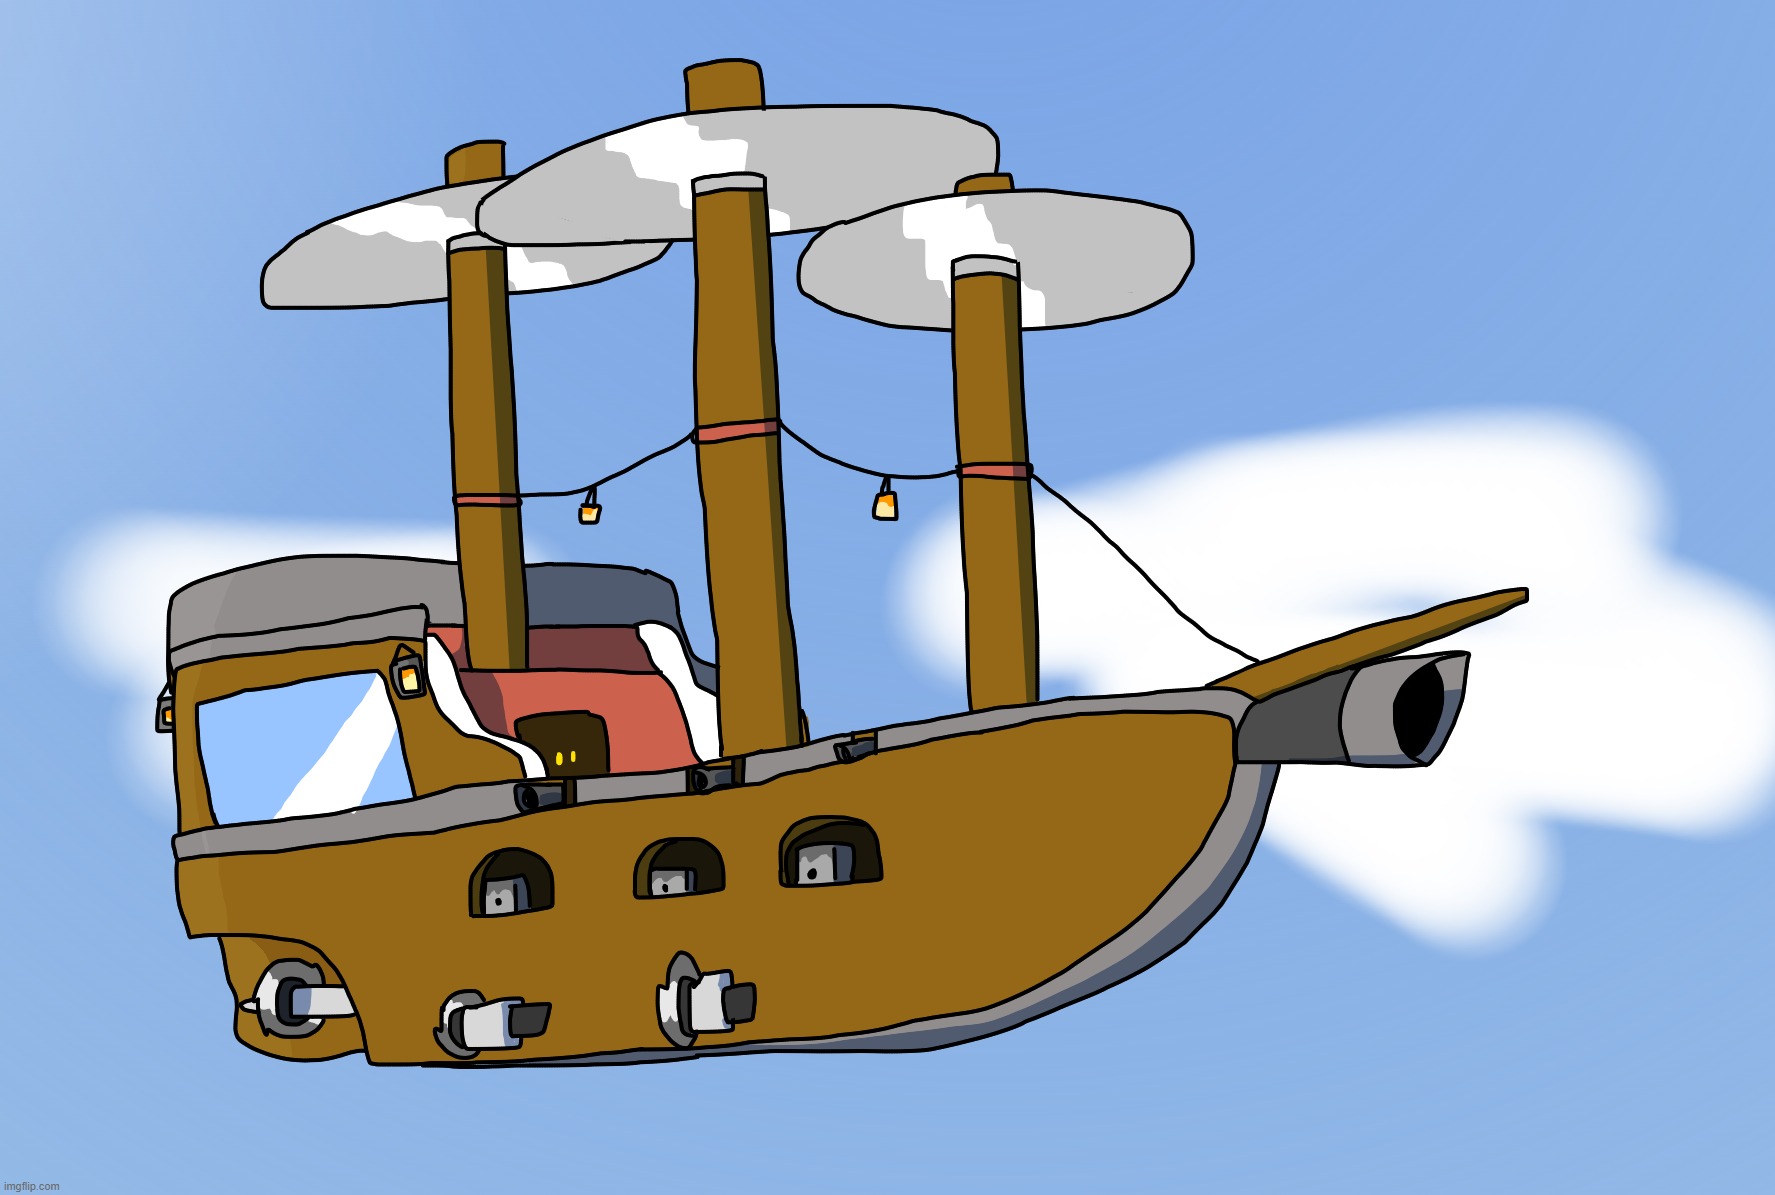 came around to posting the boat drawing | made w/ Imgflip meme maker